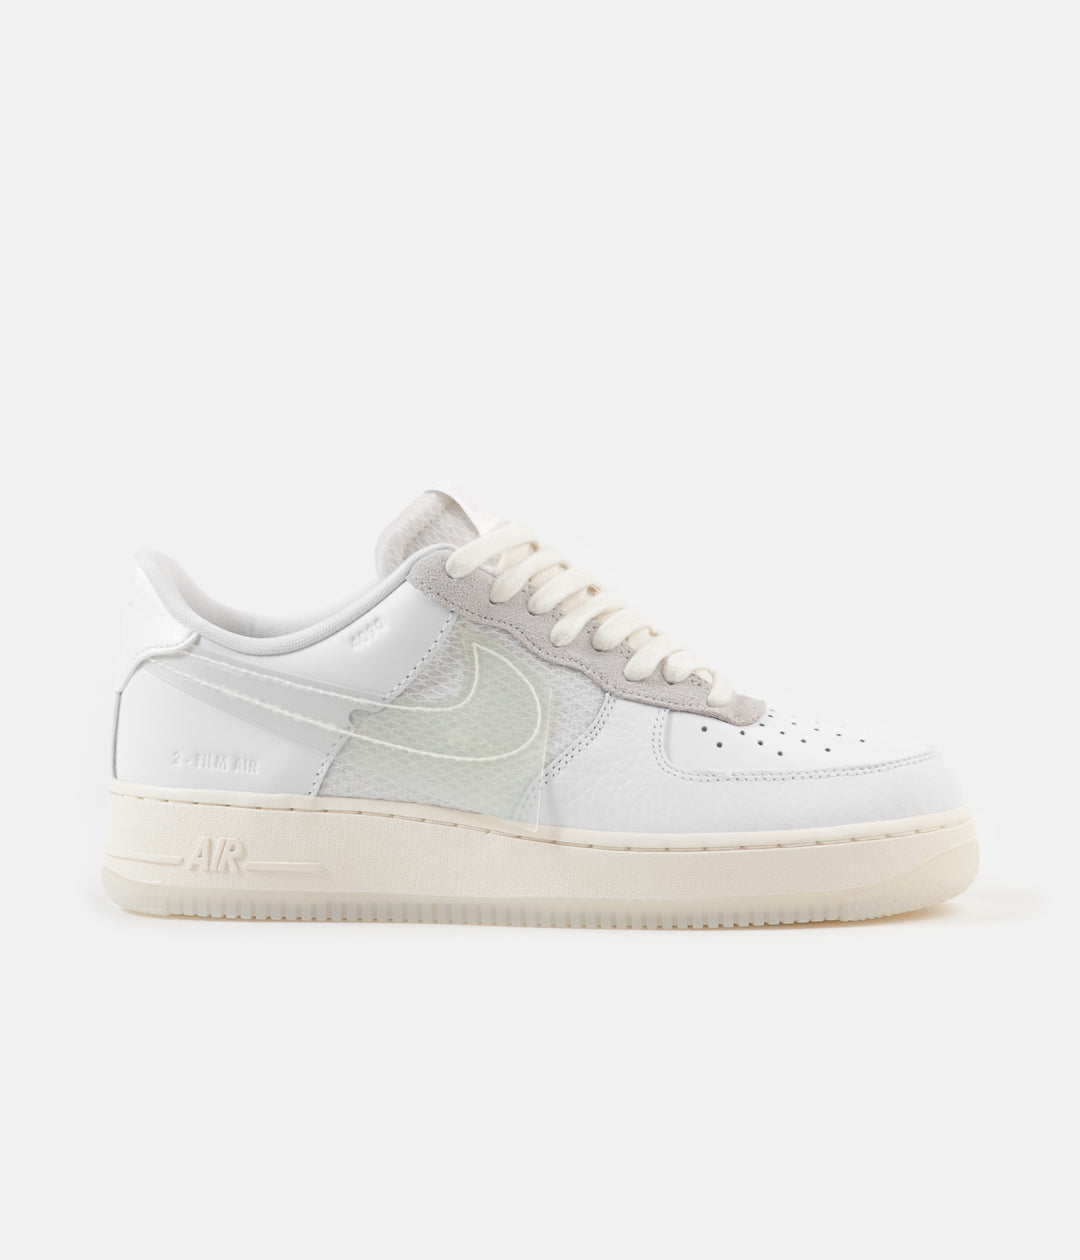 air force 1 with coloured tick